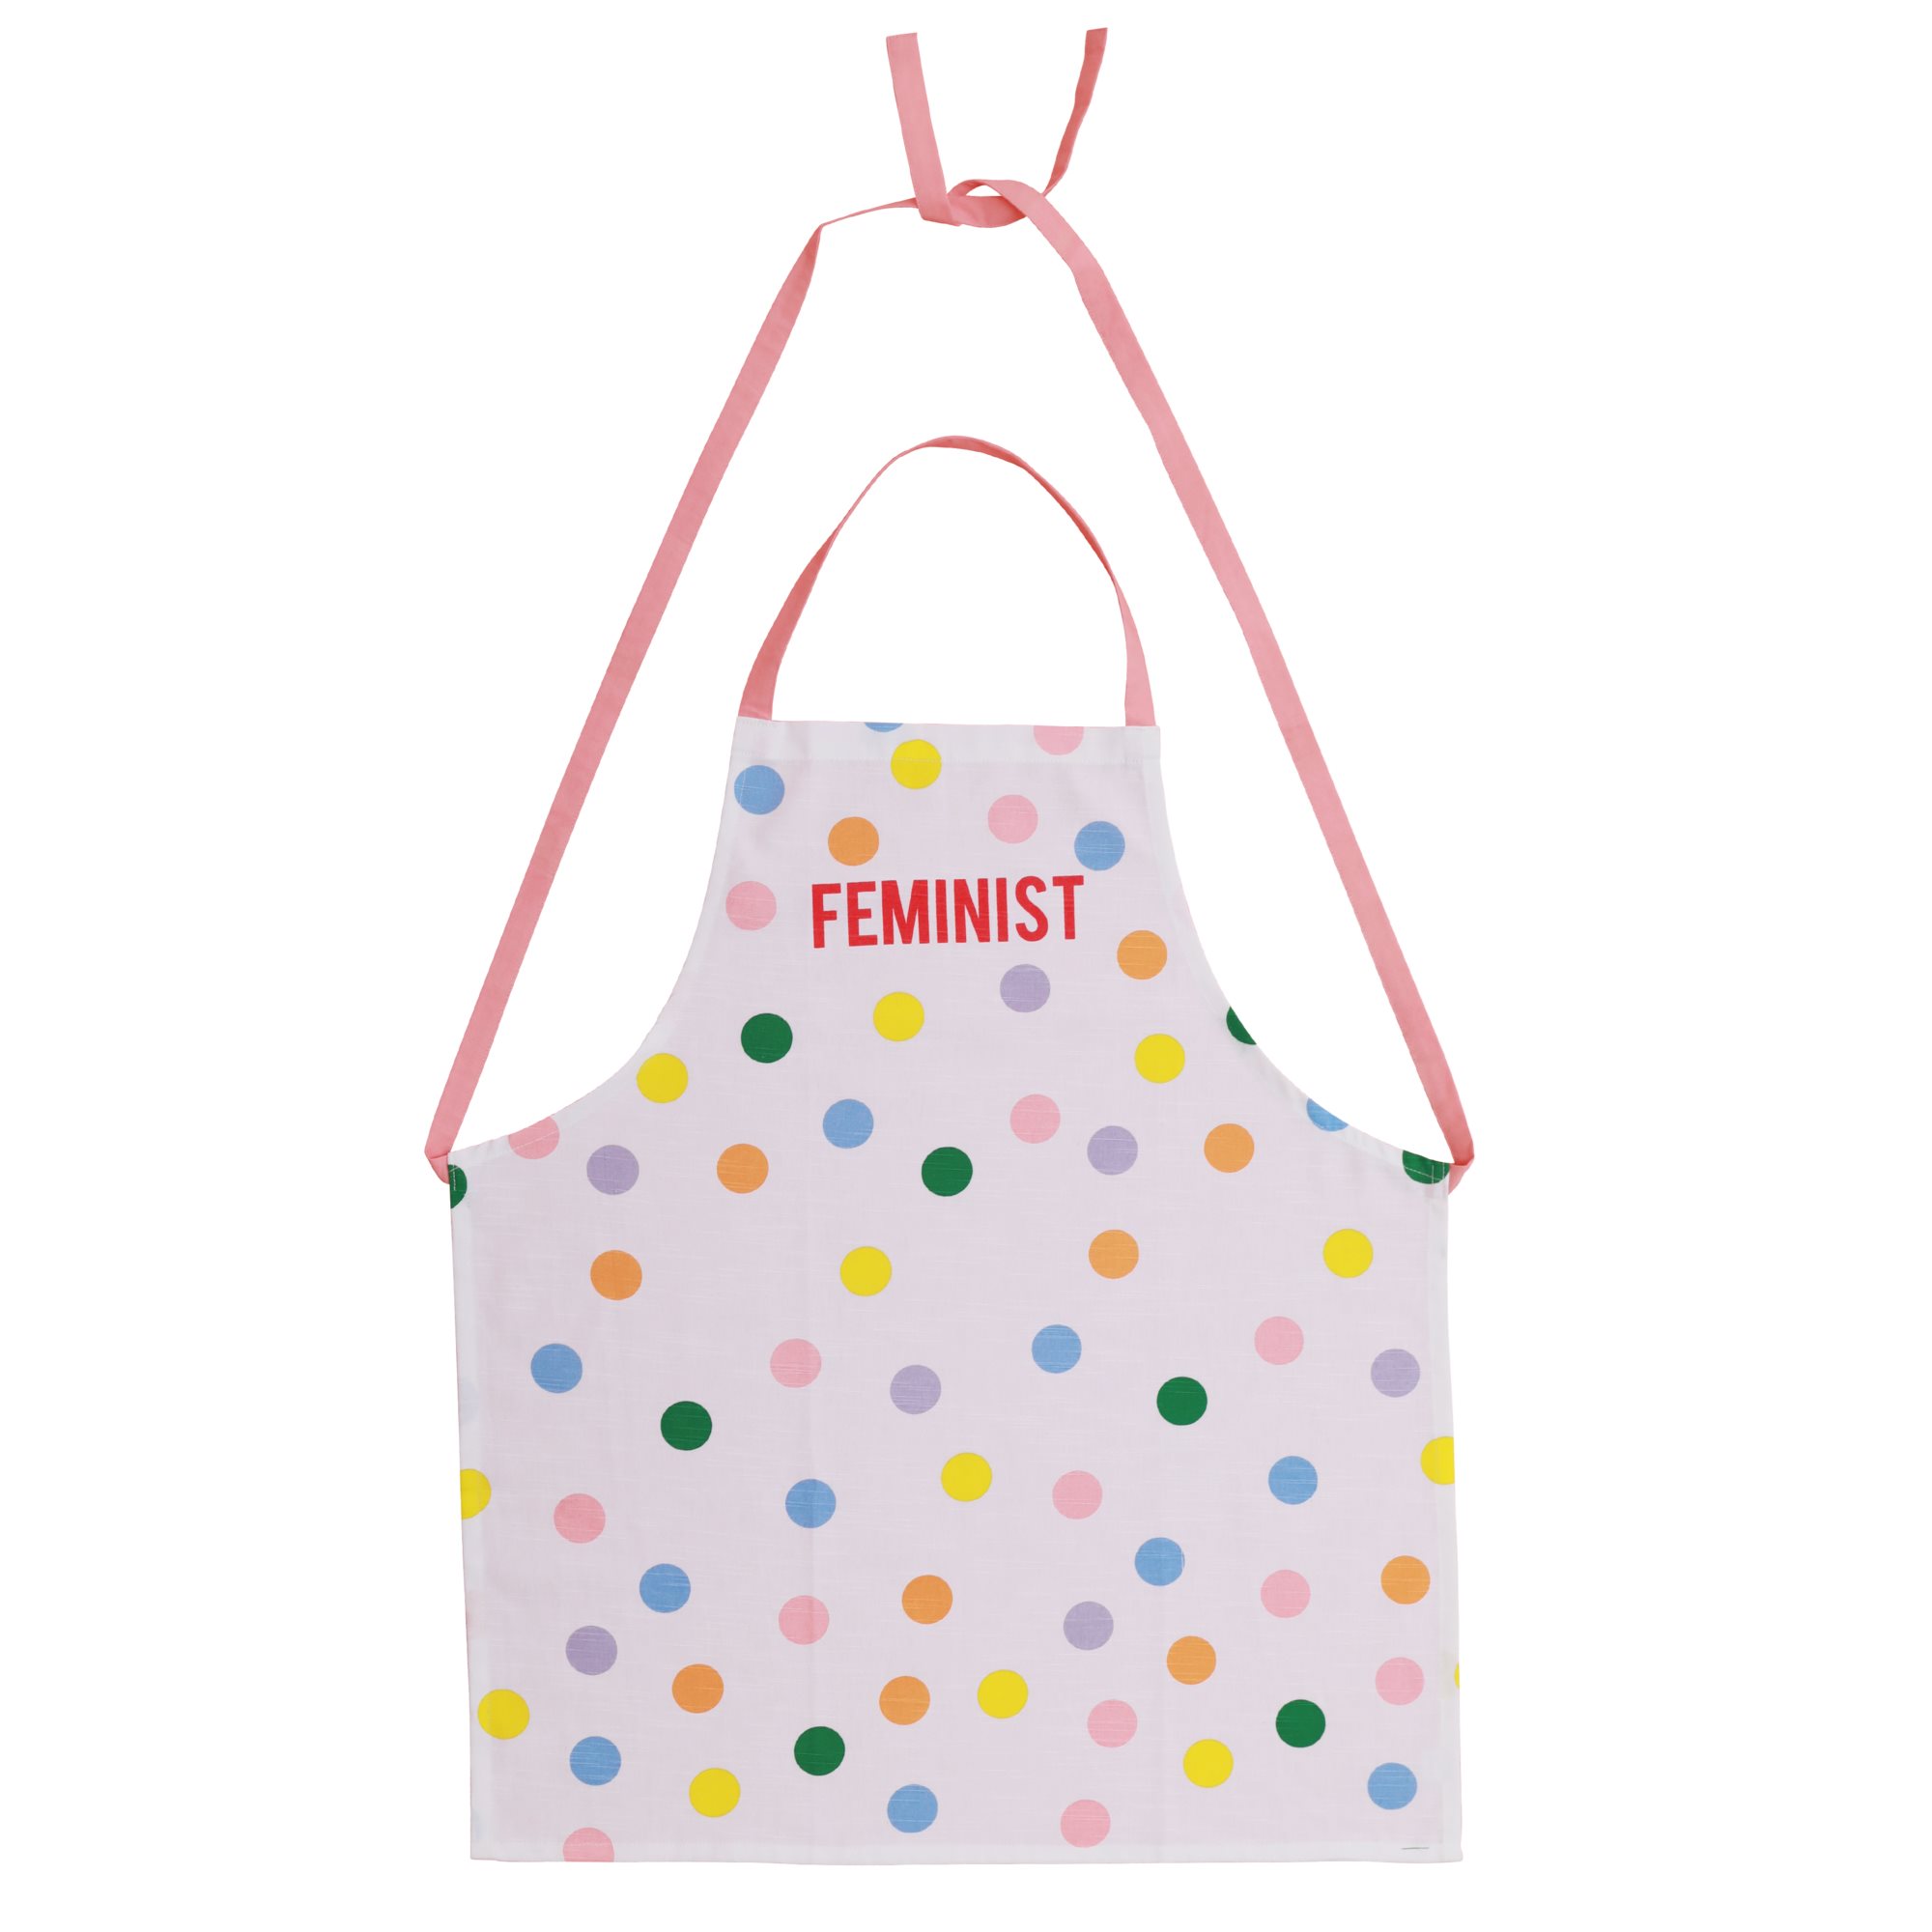 Rice - Cotton Apron w. Dots and Feminist Print